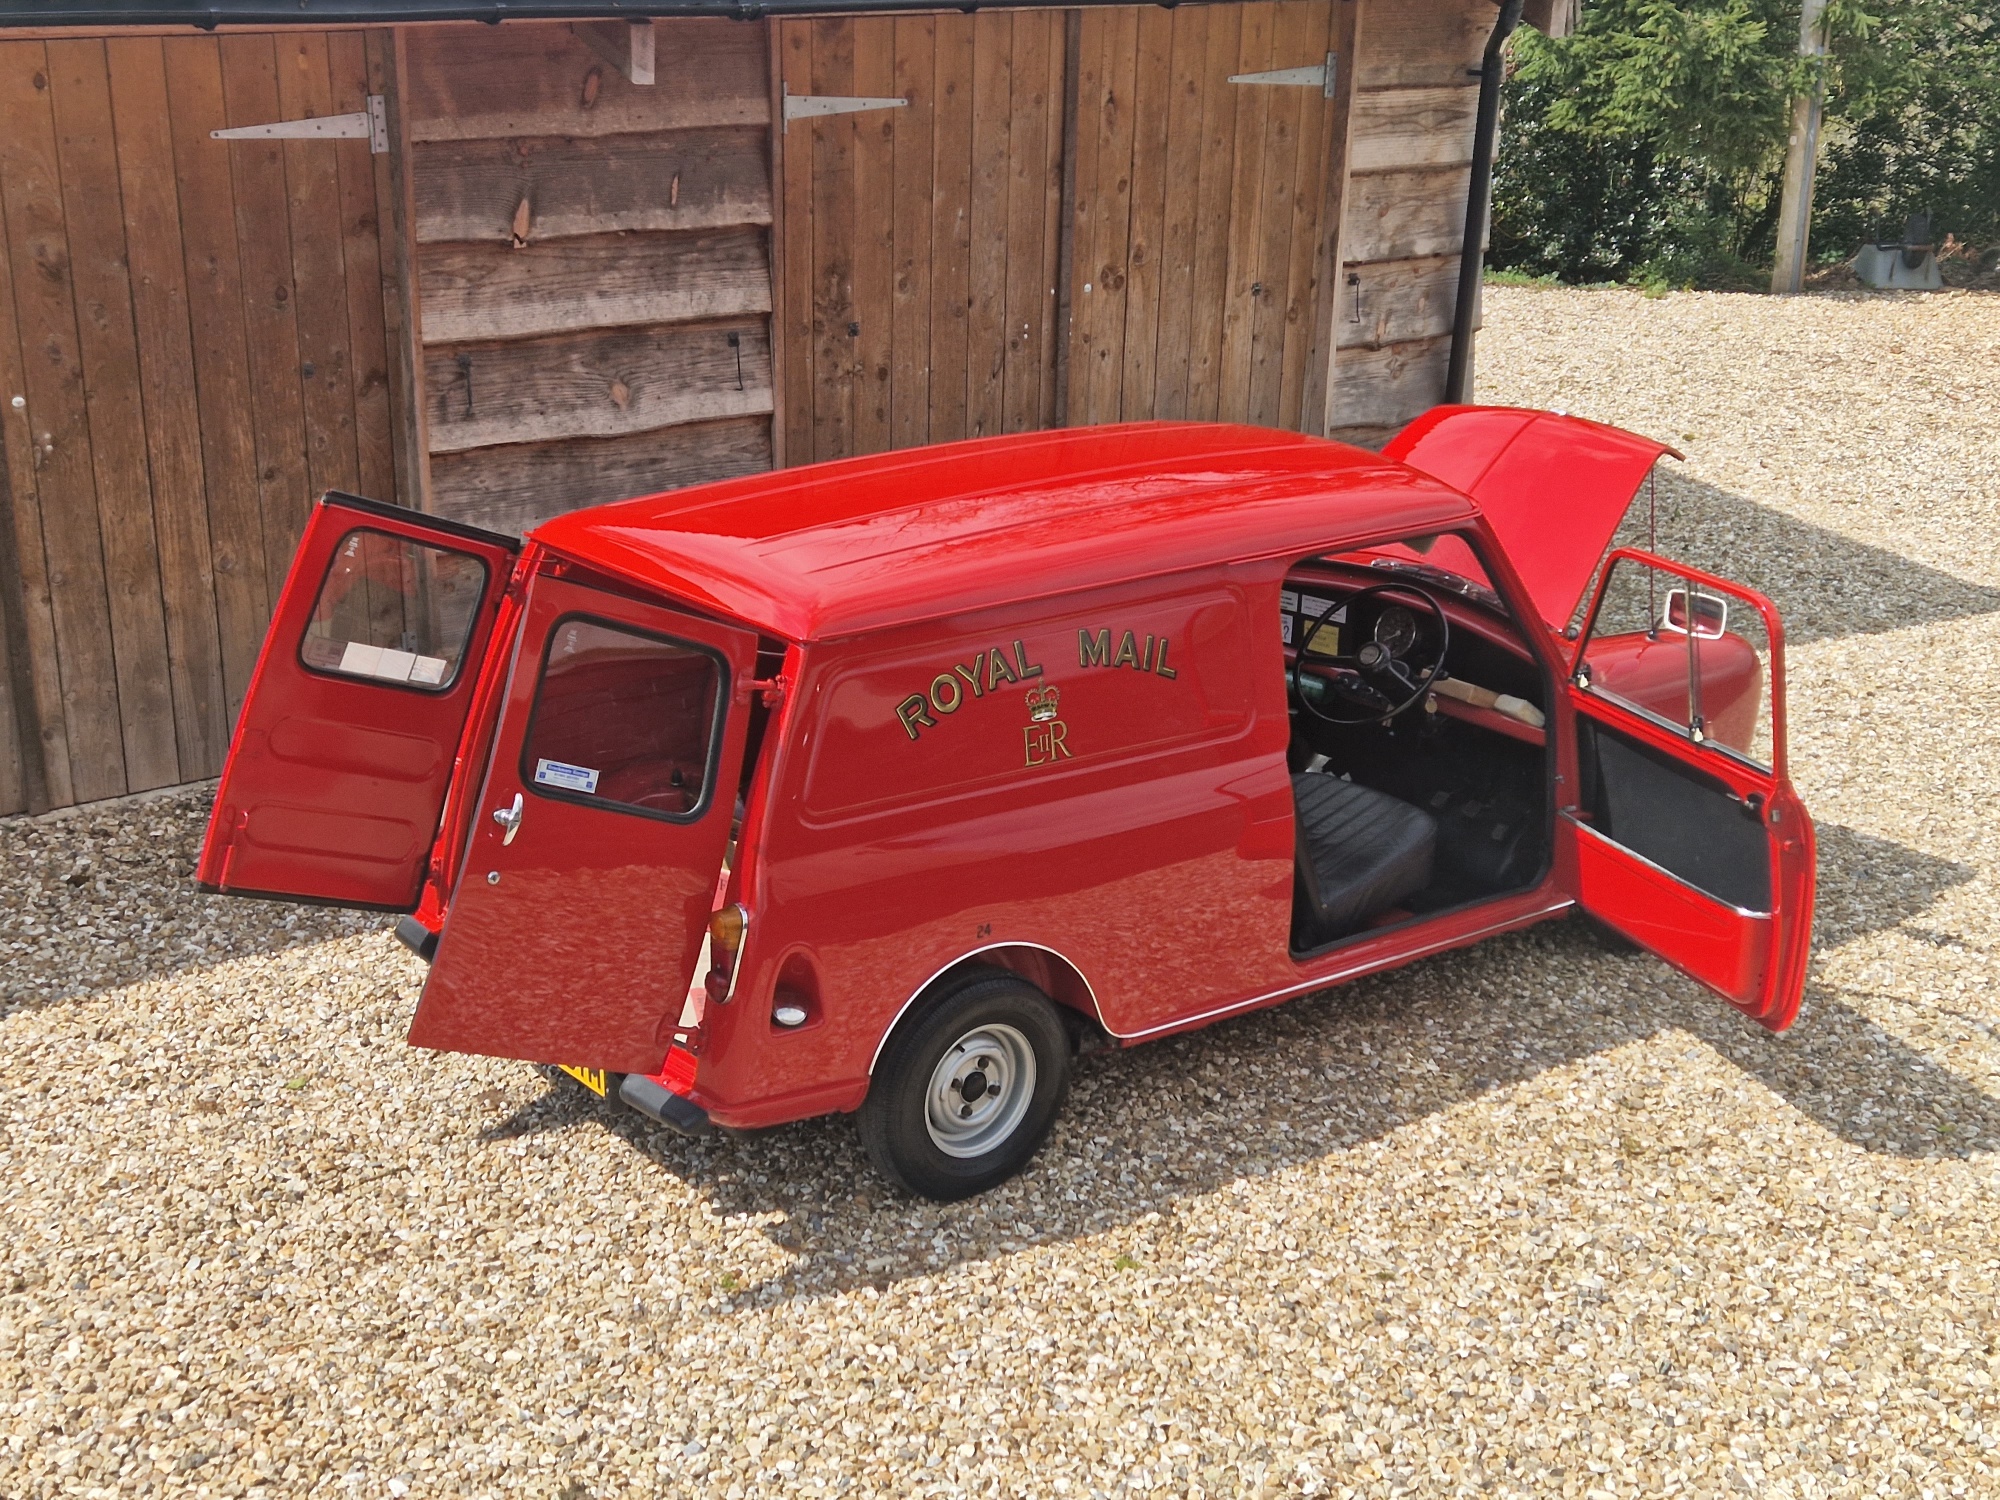 ** NOW SOLD ** Unique Opportunity to buy a 1974 Morris Mini Ex Post Office Van 1 Of 2 Known Survivors!.